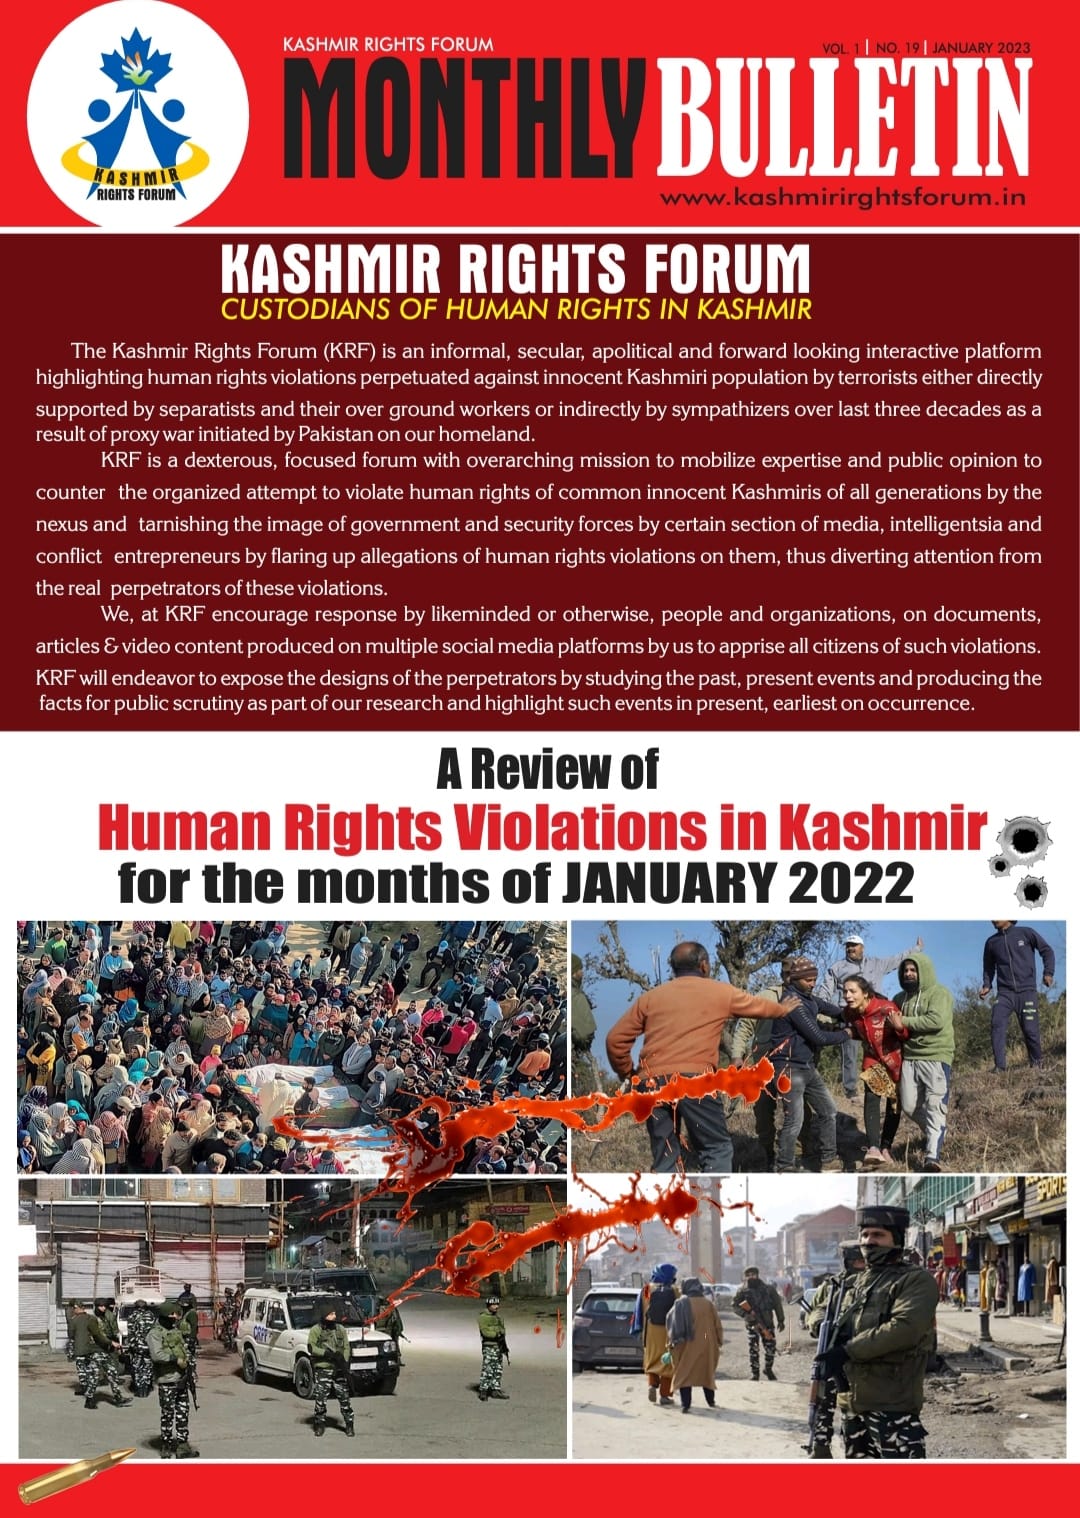 A preview of the Monthly Bulletin January 2023 comprising of Human Rights Violations in Kashmir at hands of terrorists.